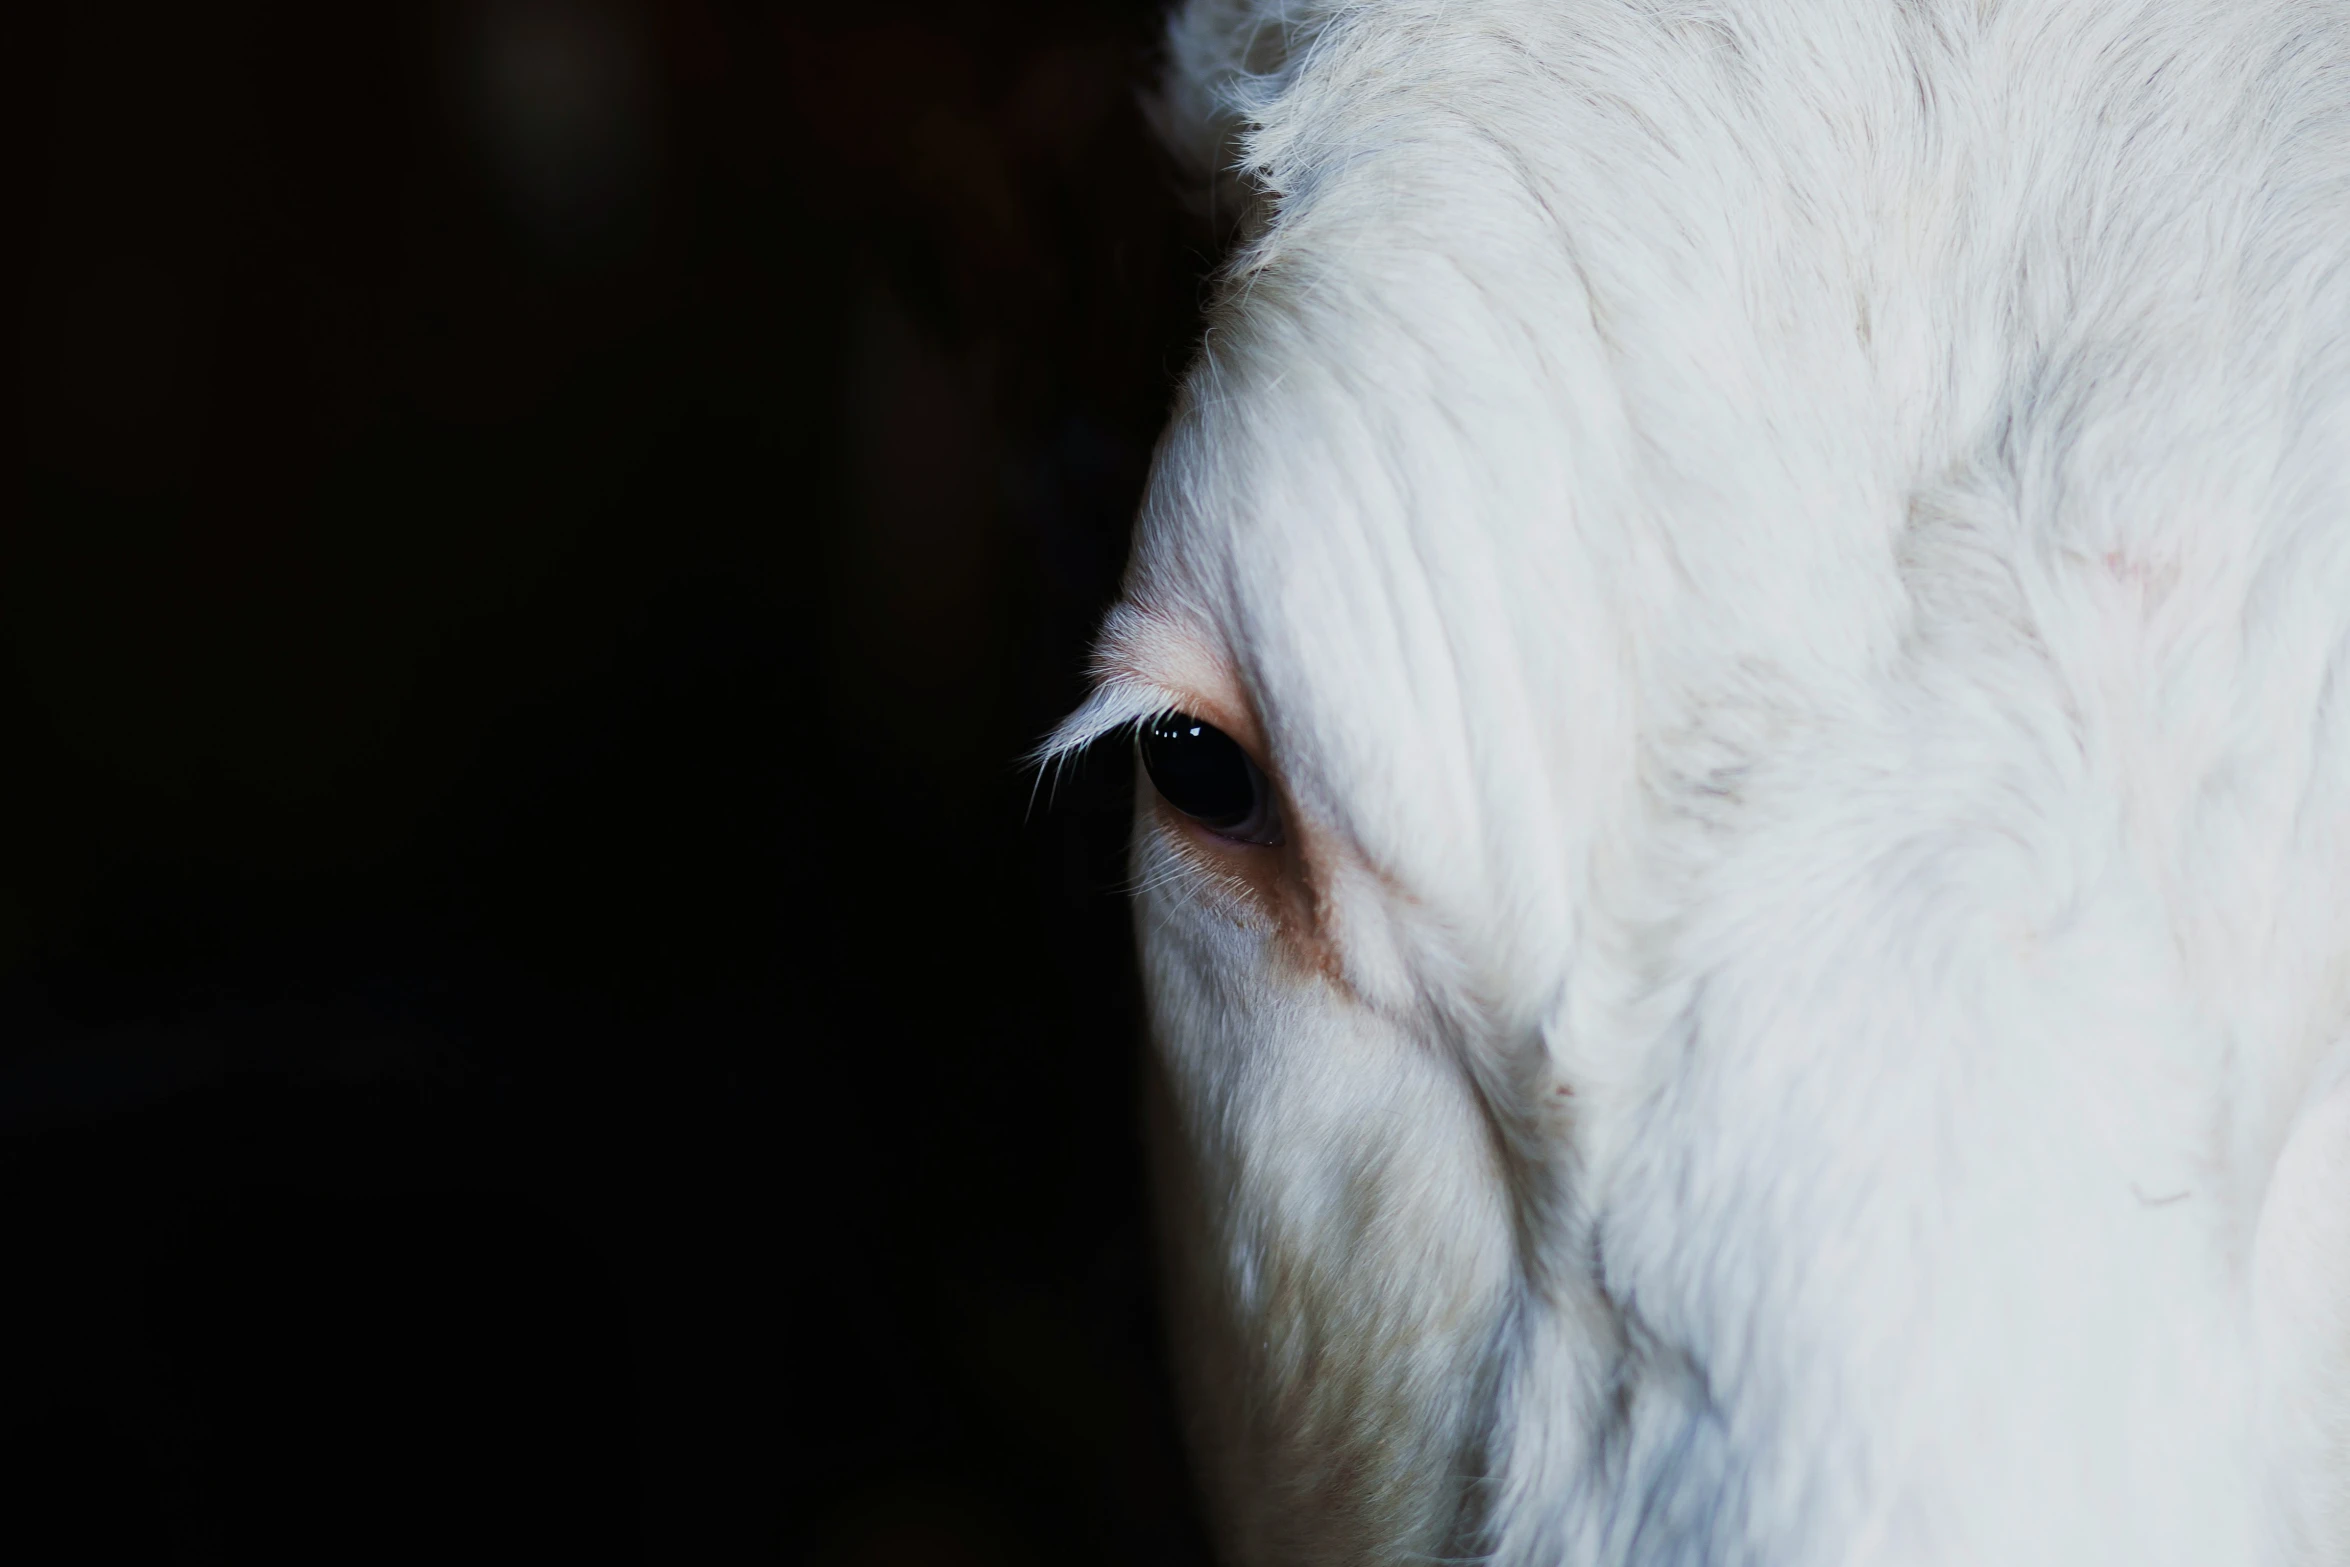 a white horse with long eyelashes looks directly into the camera